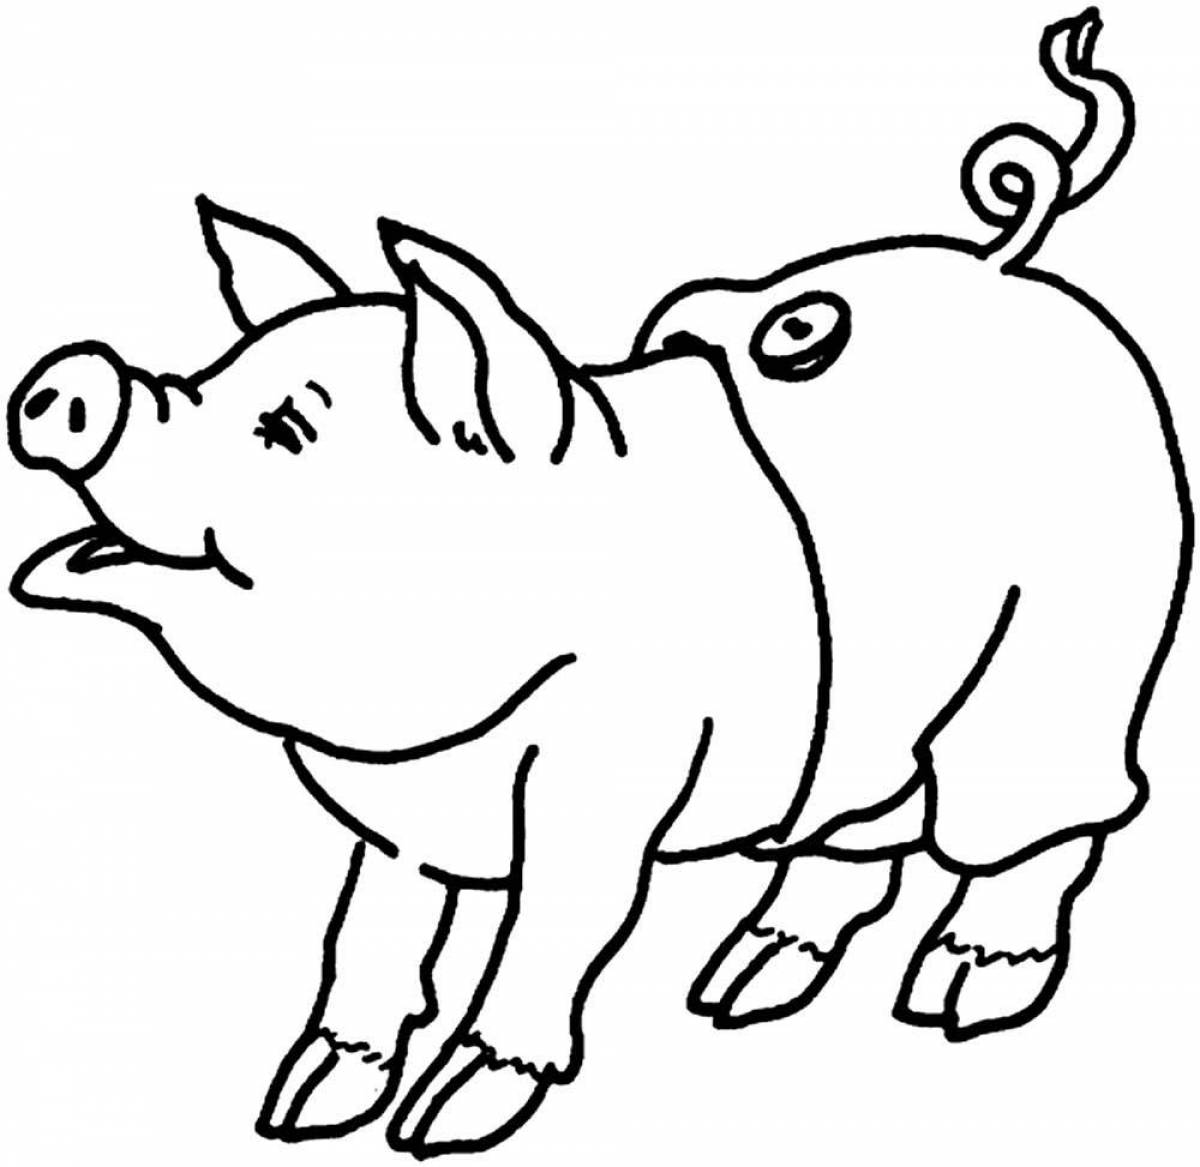 Coloring page wild pig